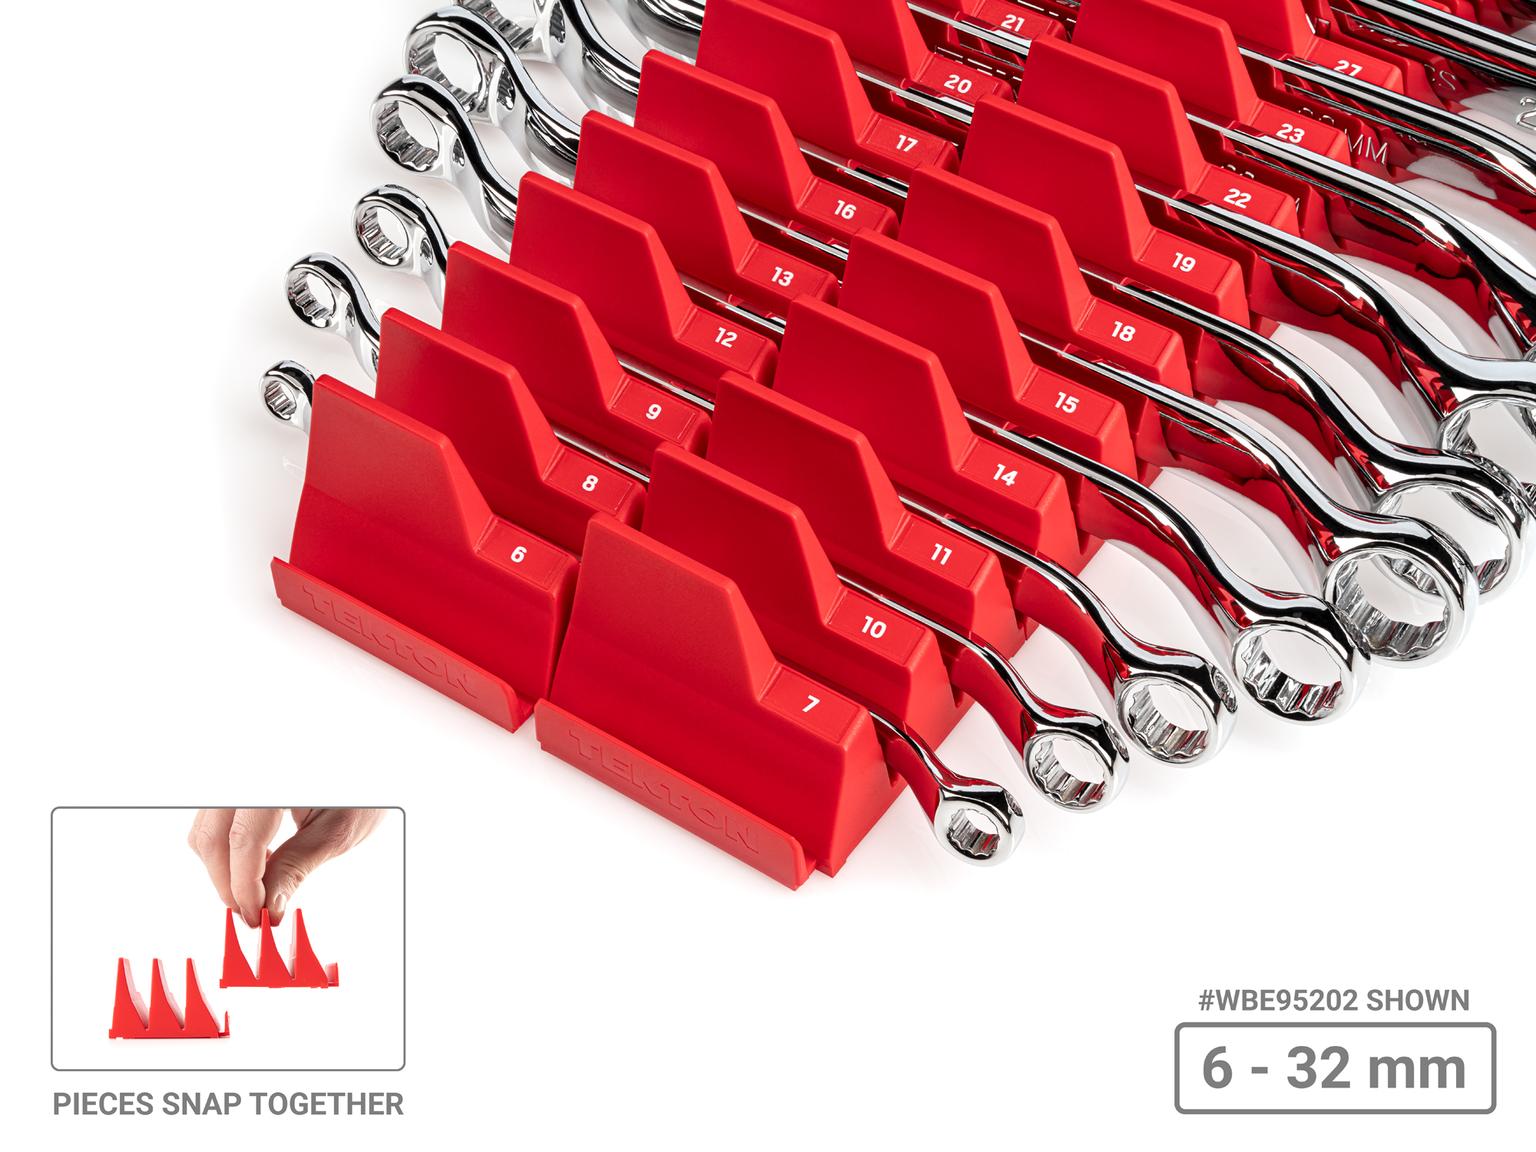 TEKTON WBE95202-T 45-Degree Offset Box End Wrench Set with Modular Slotted Organizer, 11-Piece (6-32 mm)